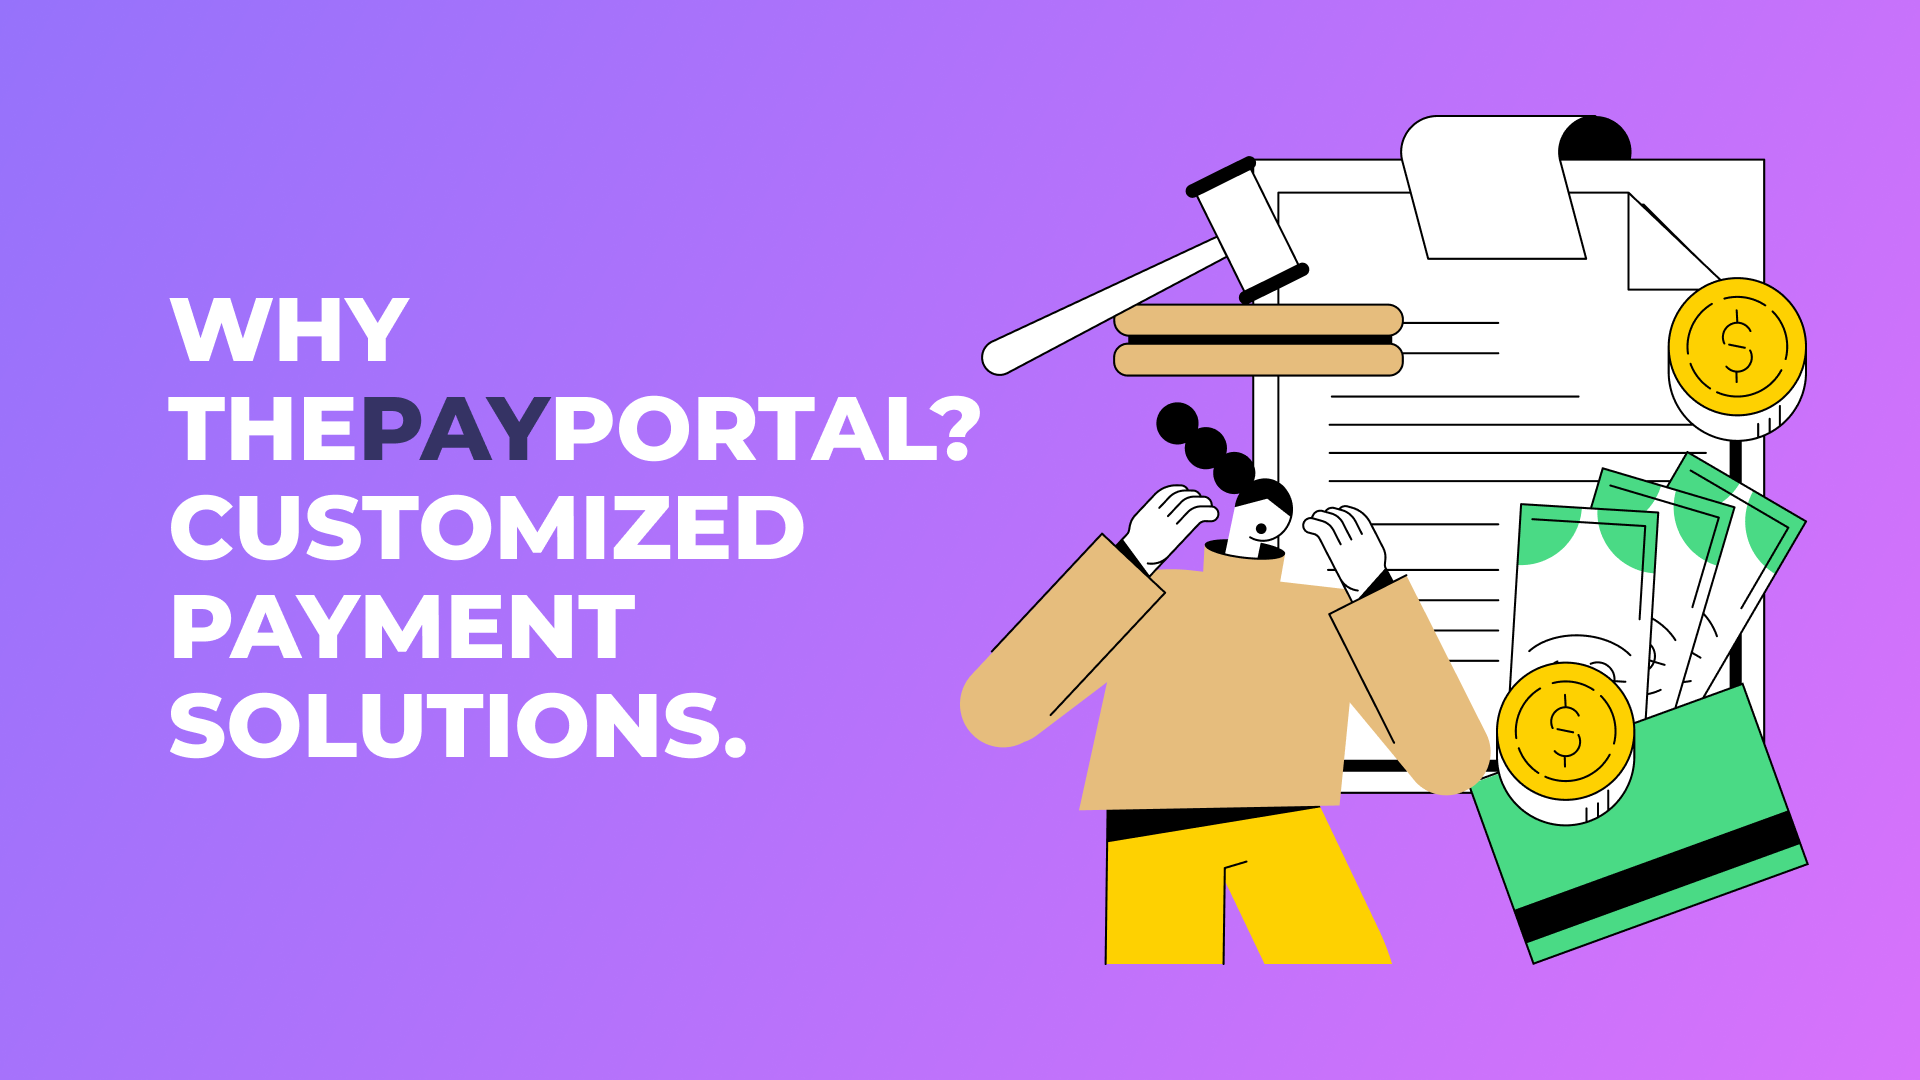 Why ThePayPortal? Customized payment solutions.